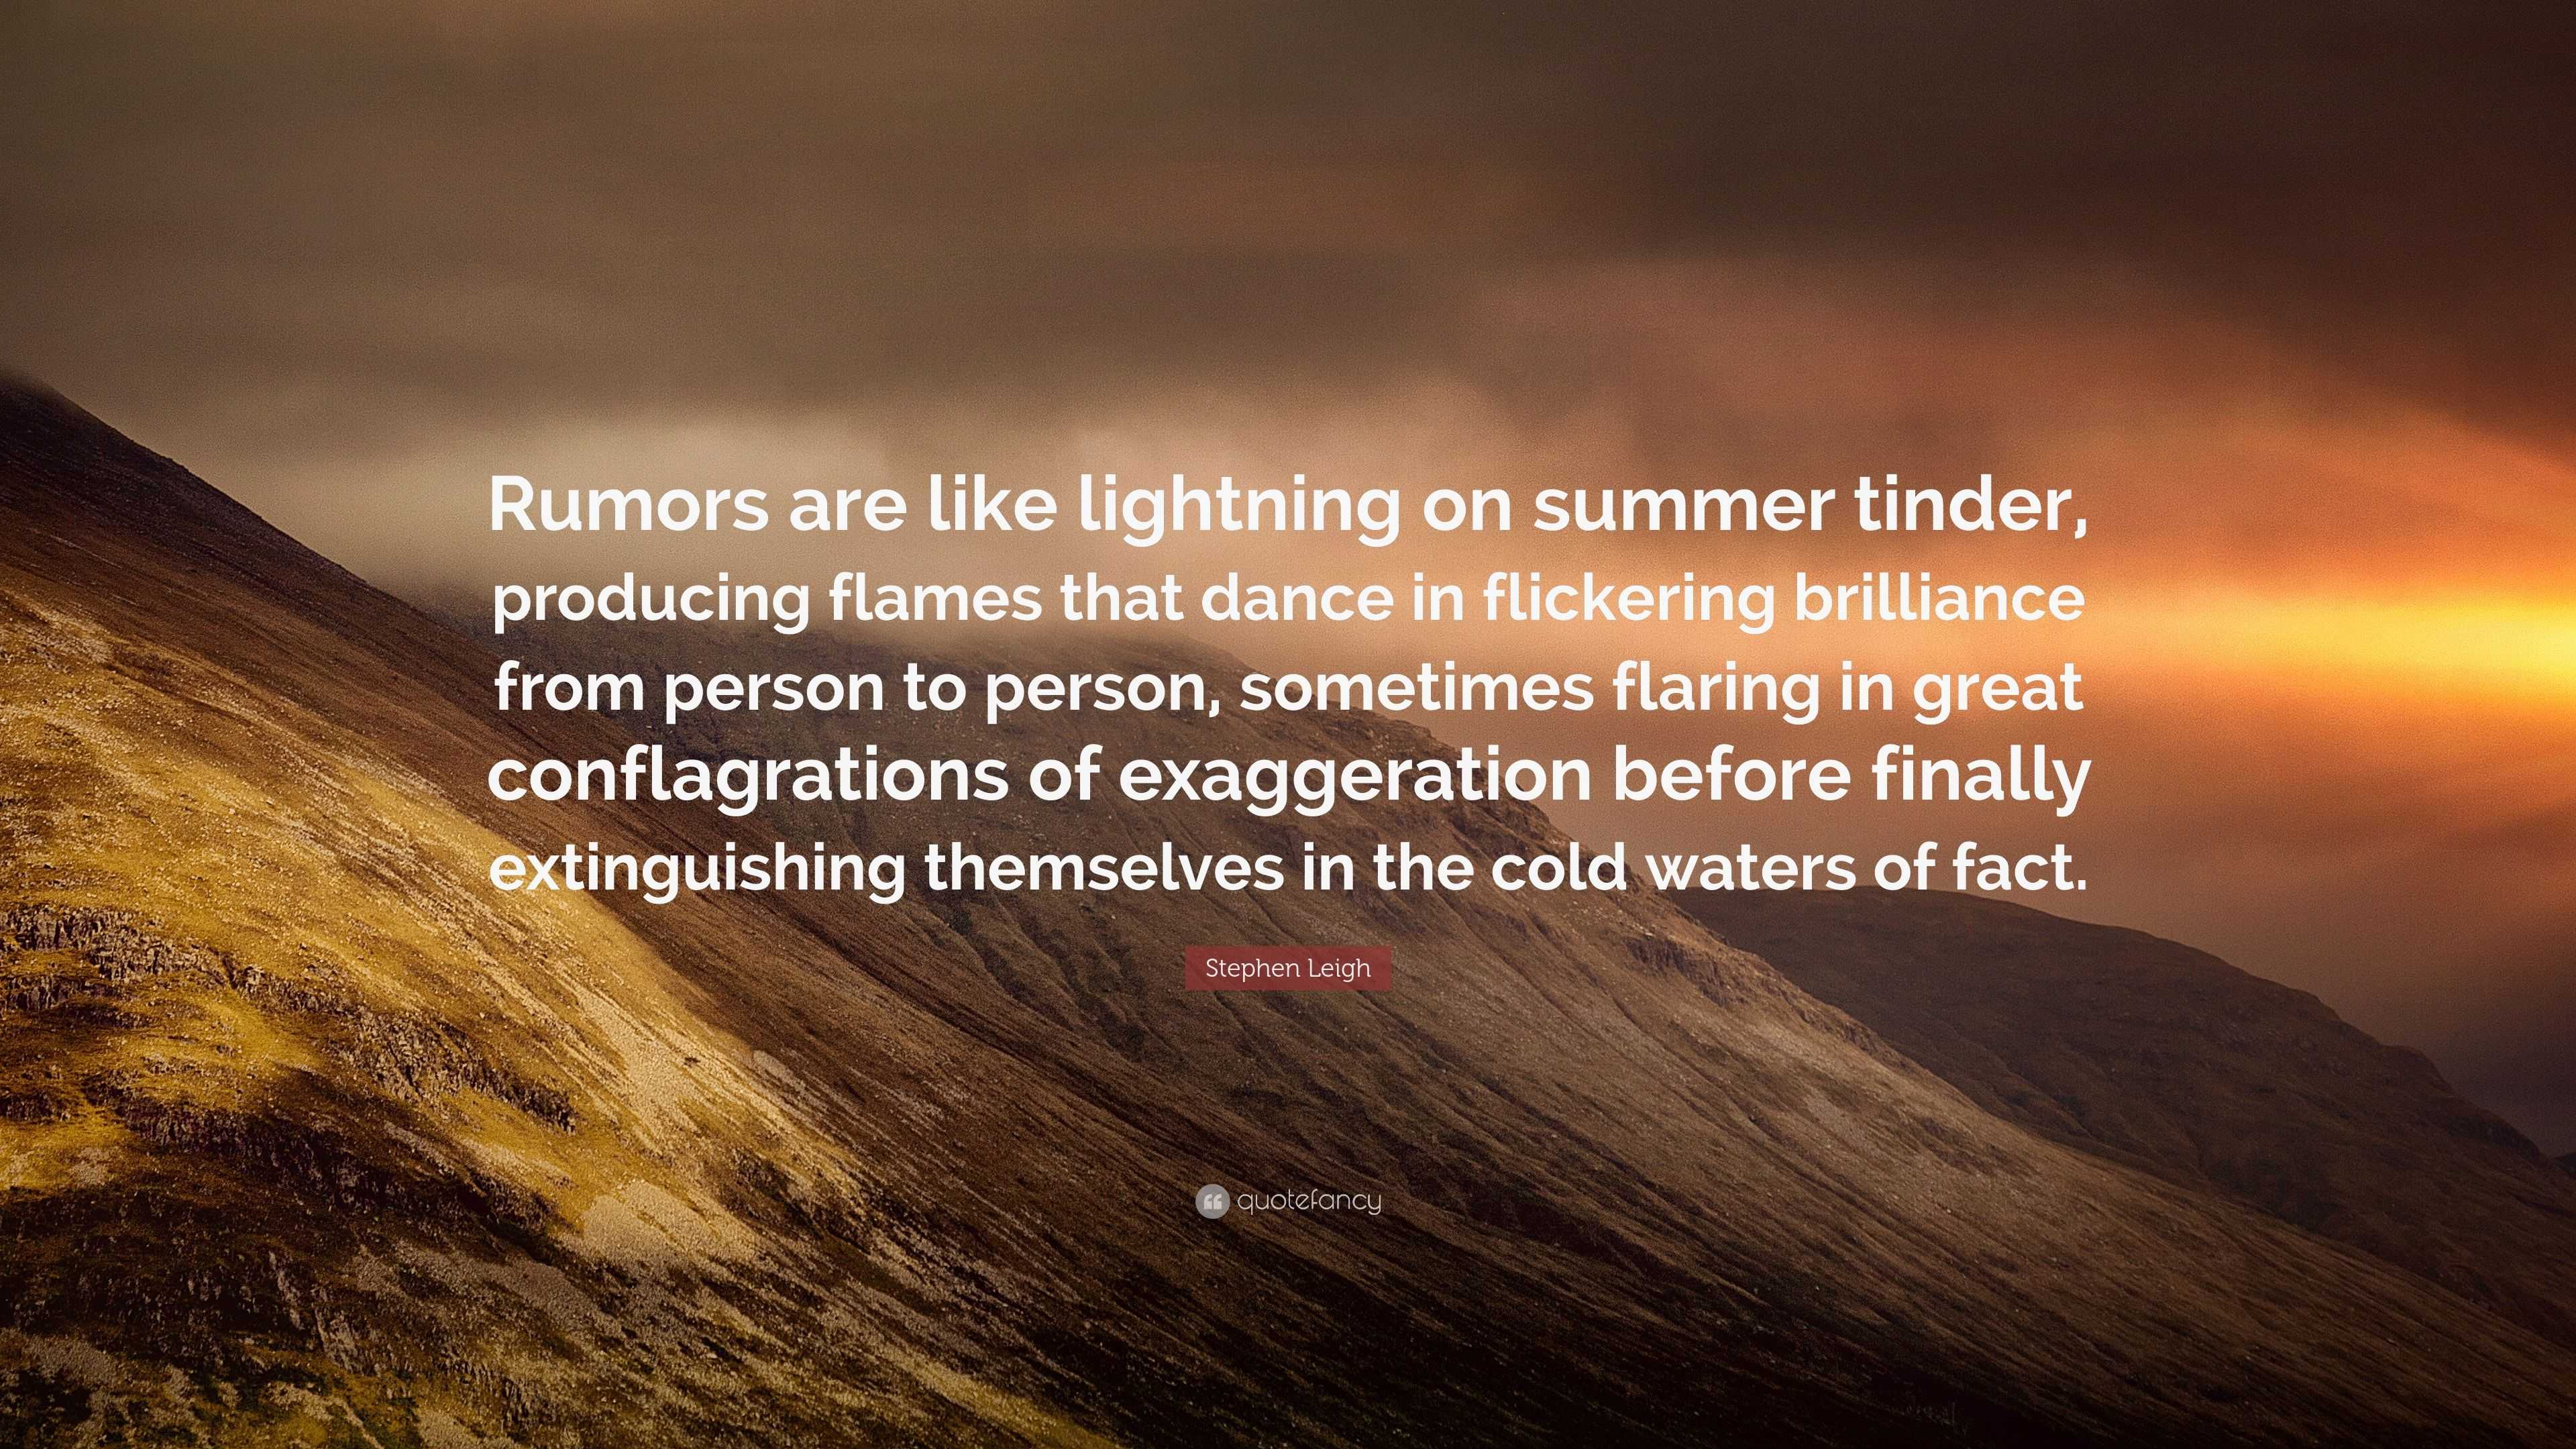 Stephen Leigh Quote: “Rumors are like lightning on summer tinder, producing  flames that dance in flickering brilliance from person to person, ...”